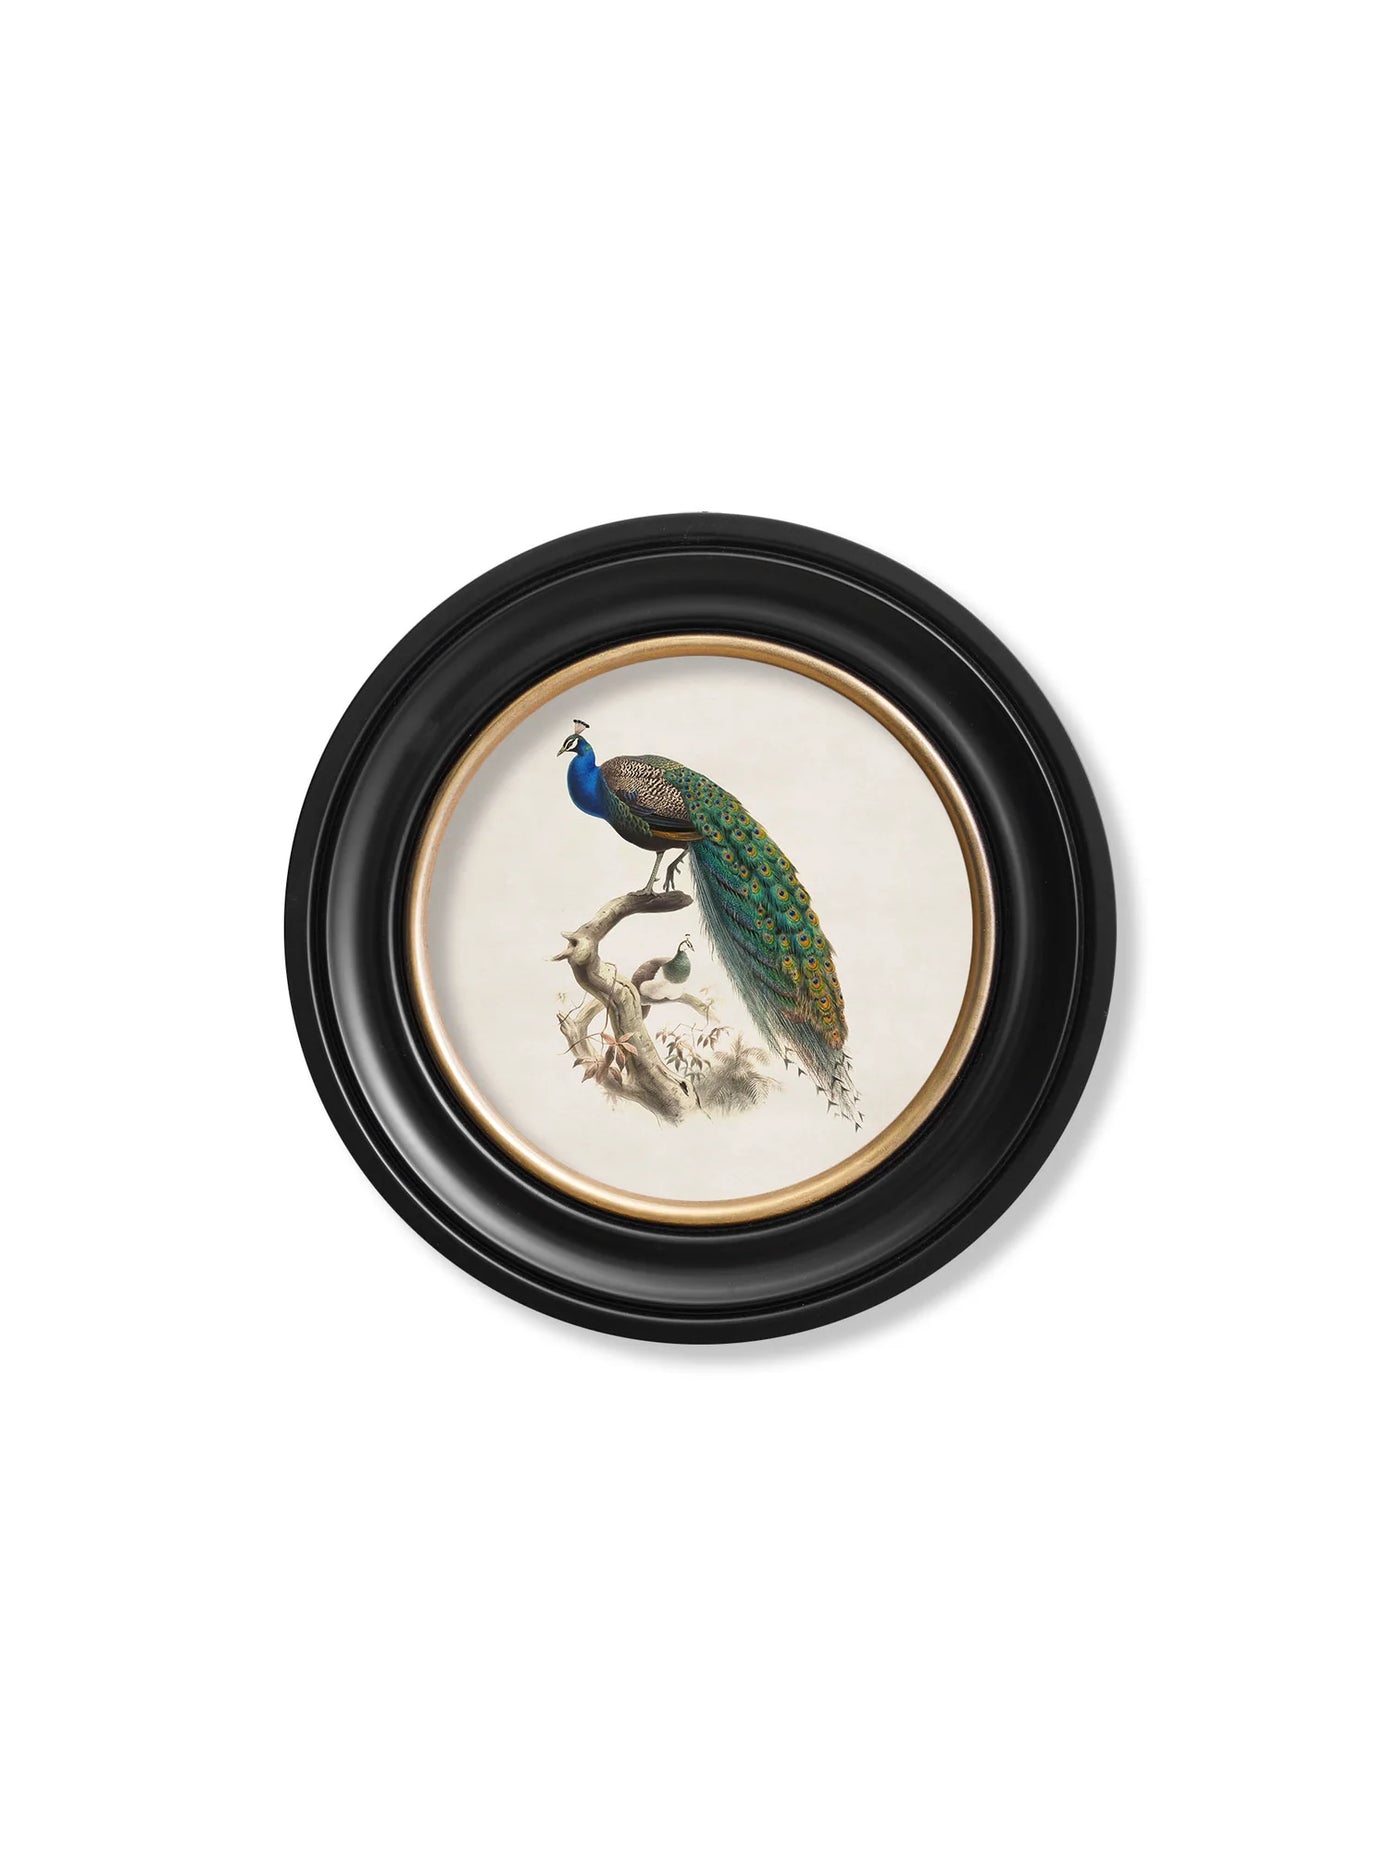 C.1800s PEACOCK - ROUND FRAME - TheArtistsQuarter